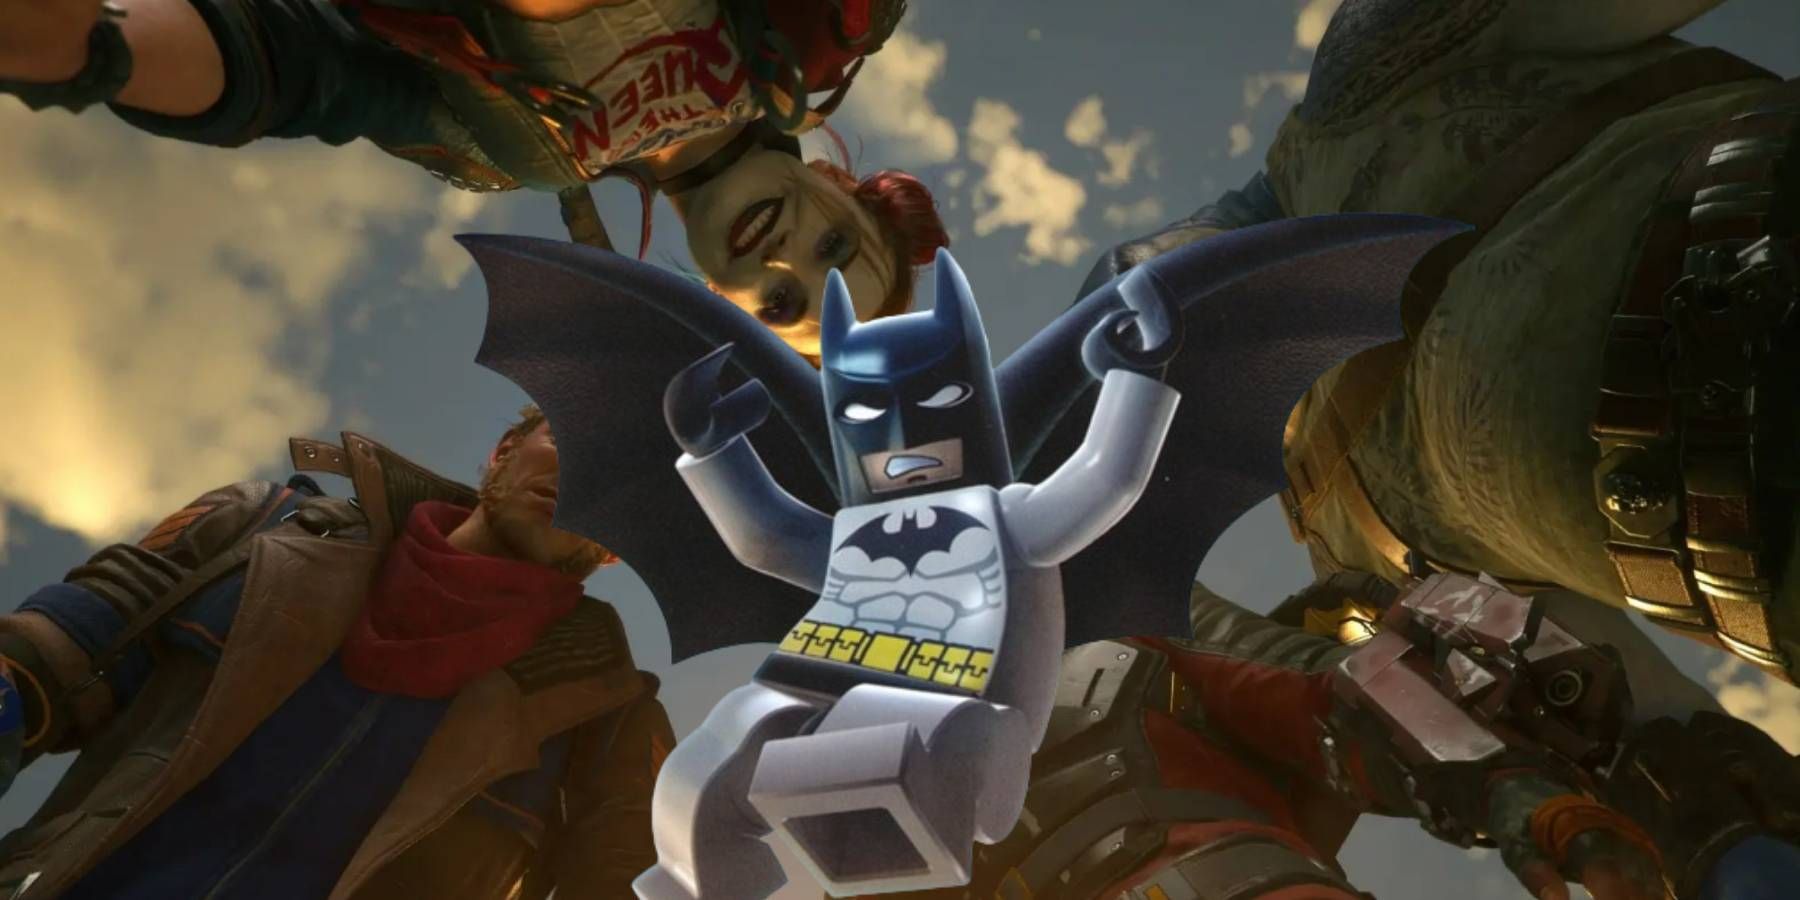 LEGO Batman interrupting a Group shot from Suicide Squad: Kill the Justice League